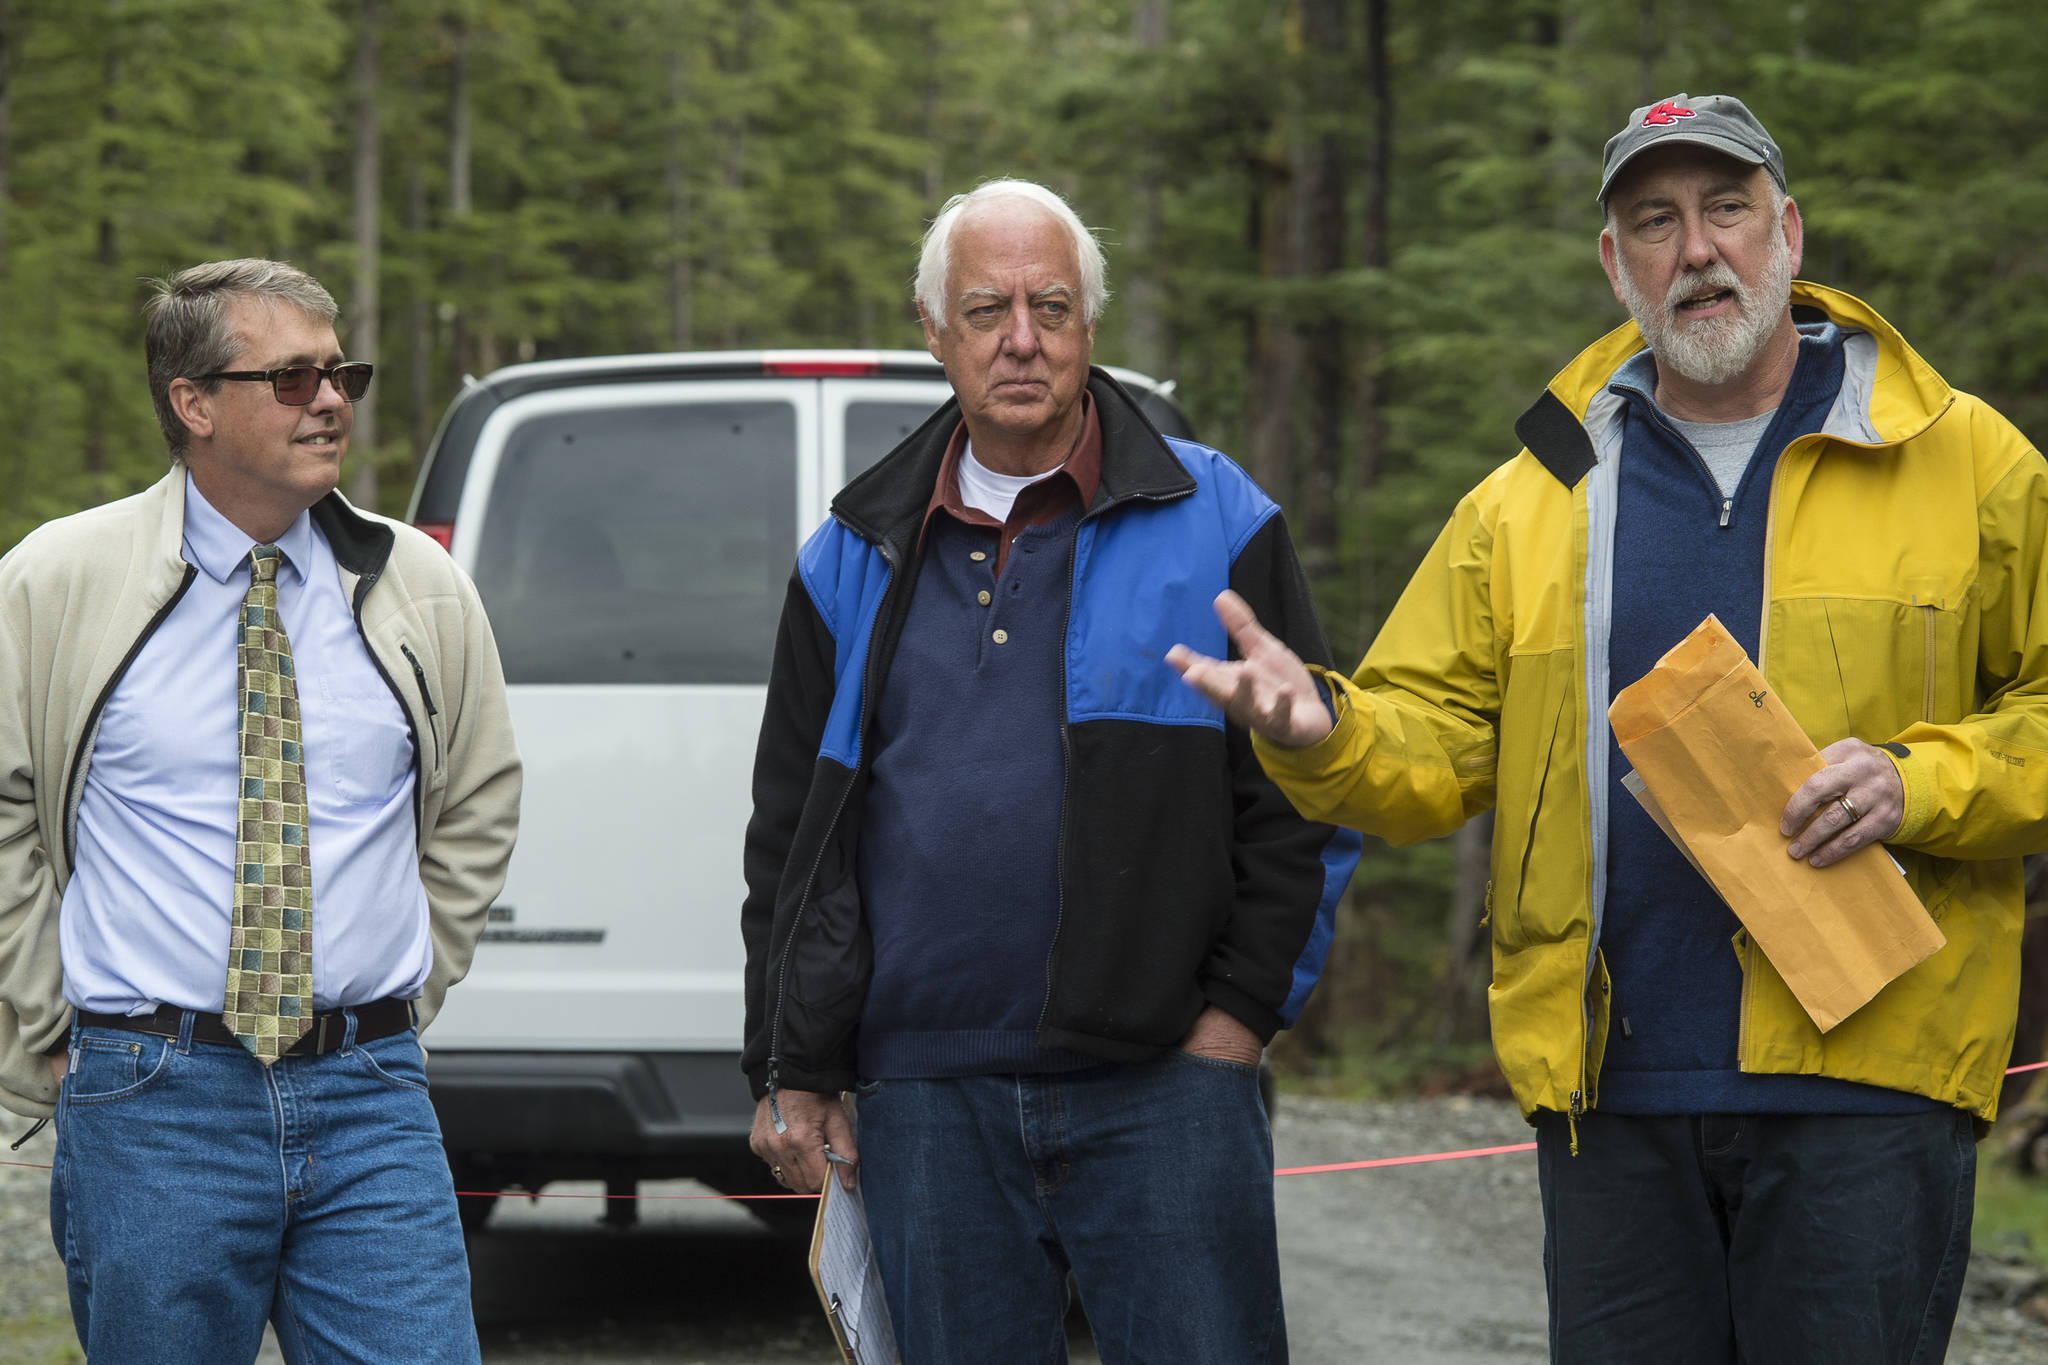 Mike Vigue, Director of the city’s Engineering and Public Works Department, right, speaks as Mayor Ken Koelsch, center, and City Manager Rorie Watt wait their turn during a ribbon cutting ceremony to officially open the West Douglas Pioneer Road on Friday, Sept. 28, 2018. (Michael Penn | Juneau Empire)